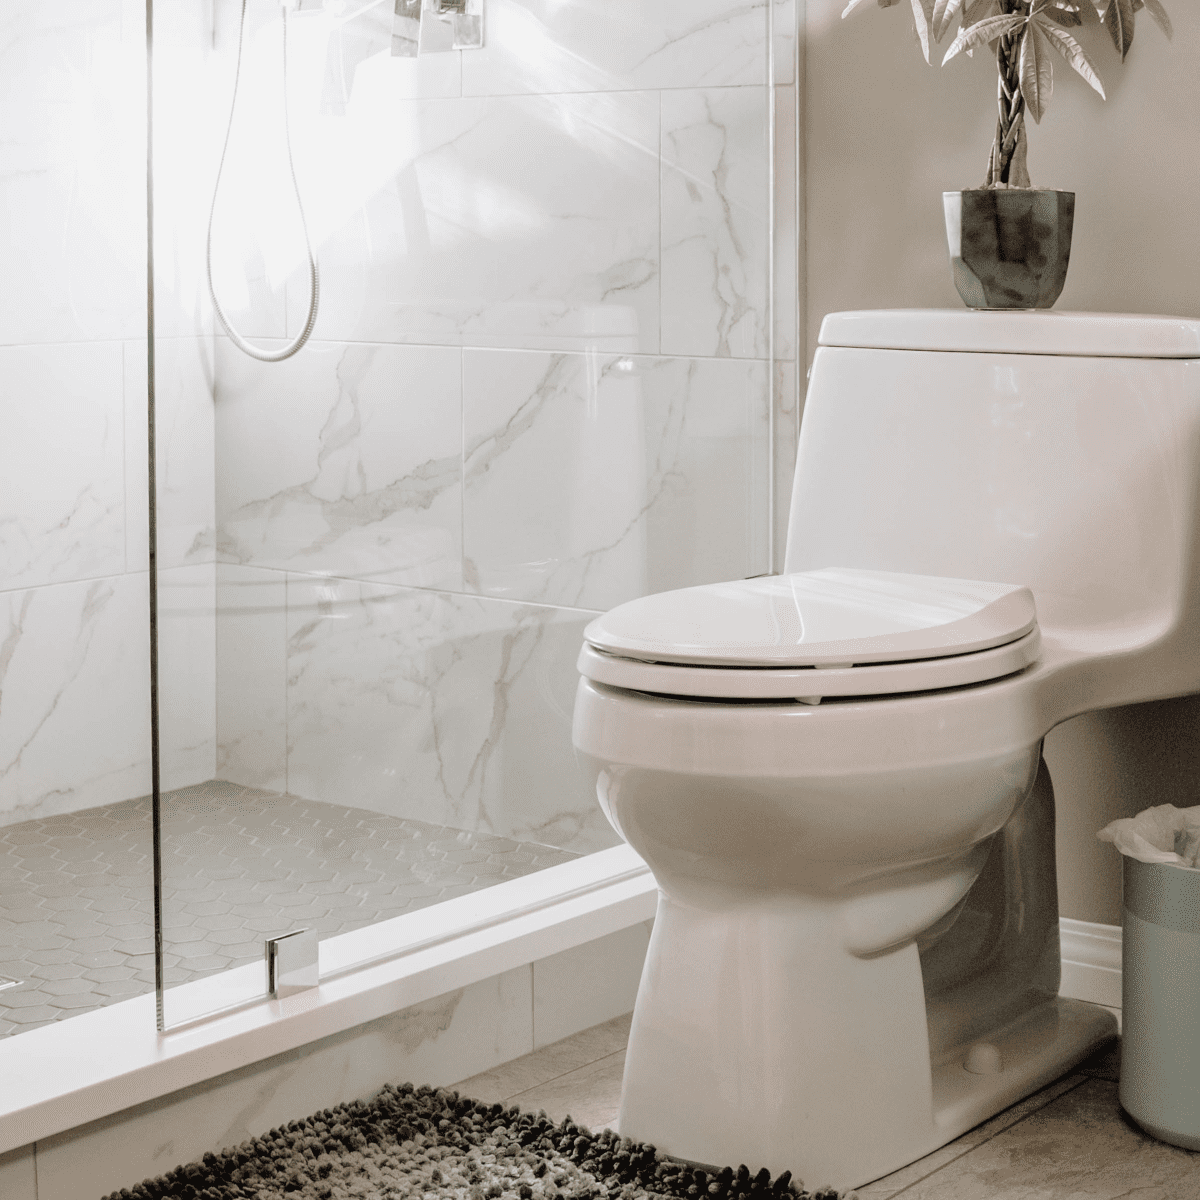 Kohler's voice-controlled bidet seat turns your dumb toilet into a  luxurious smart-throne